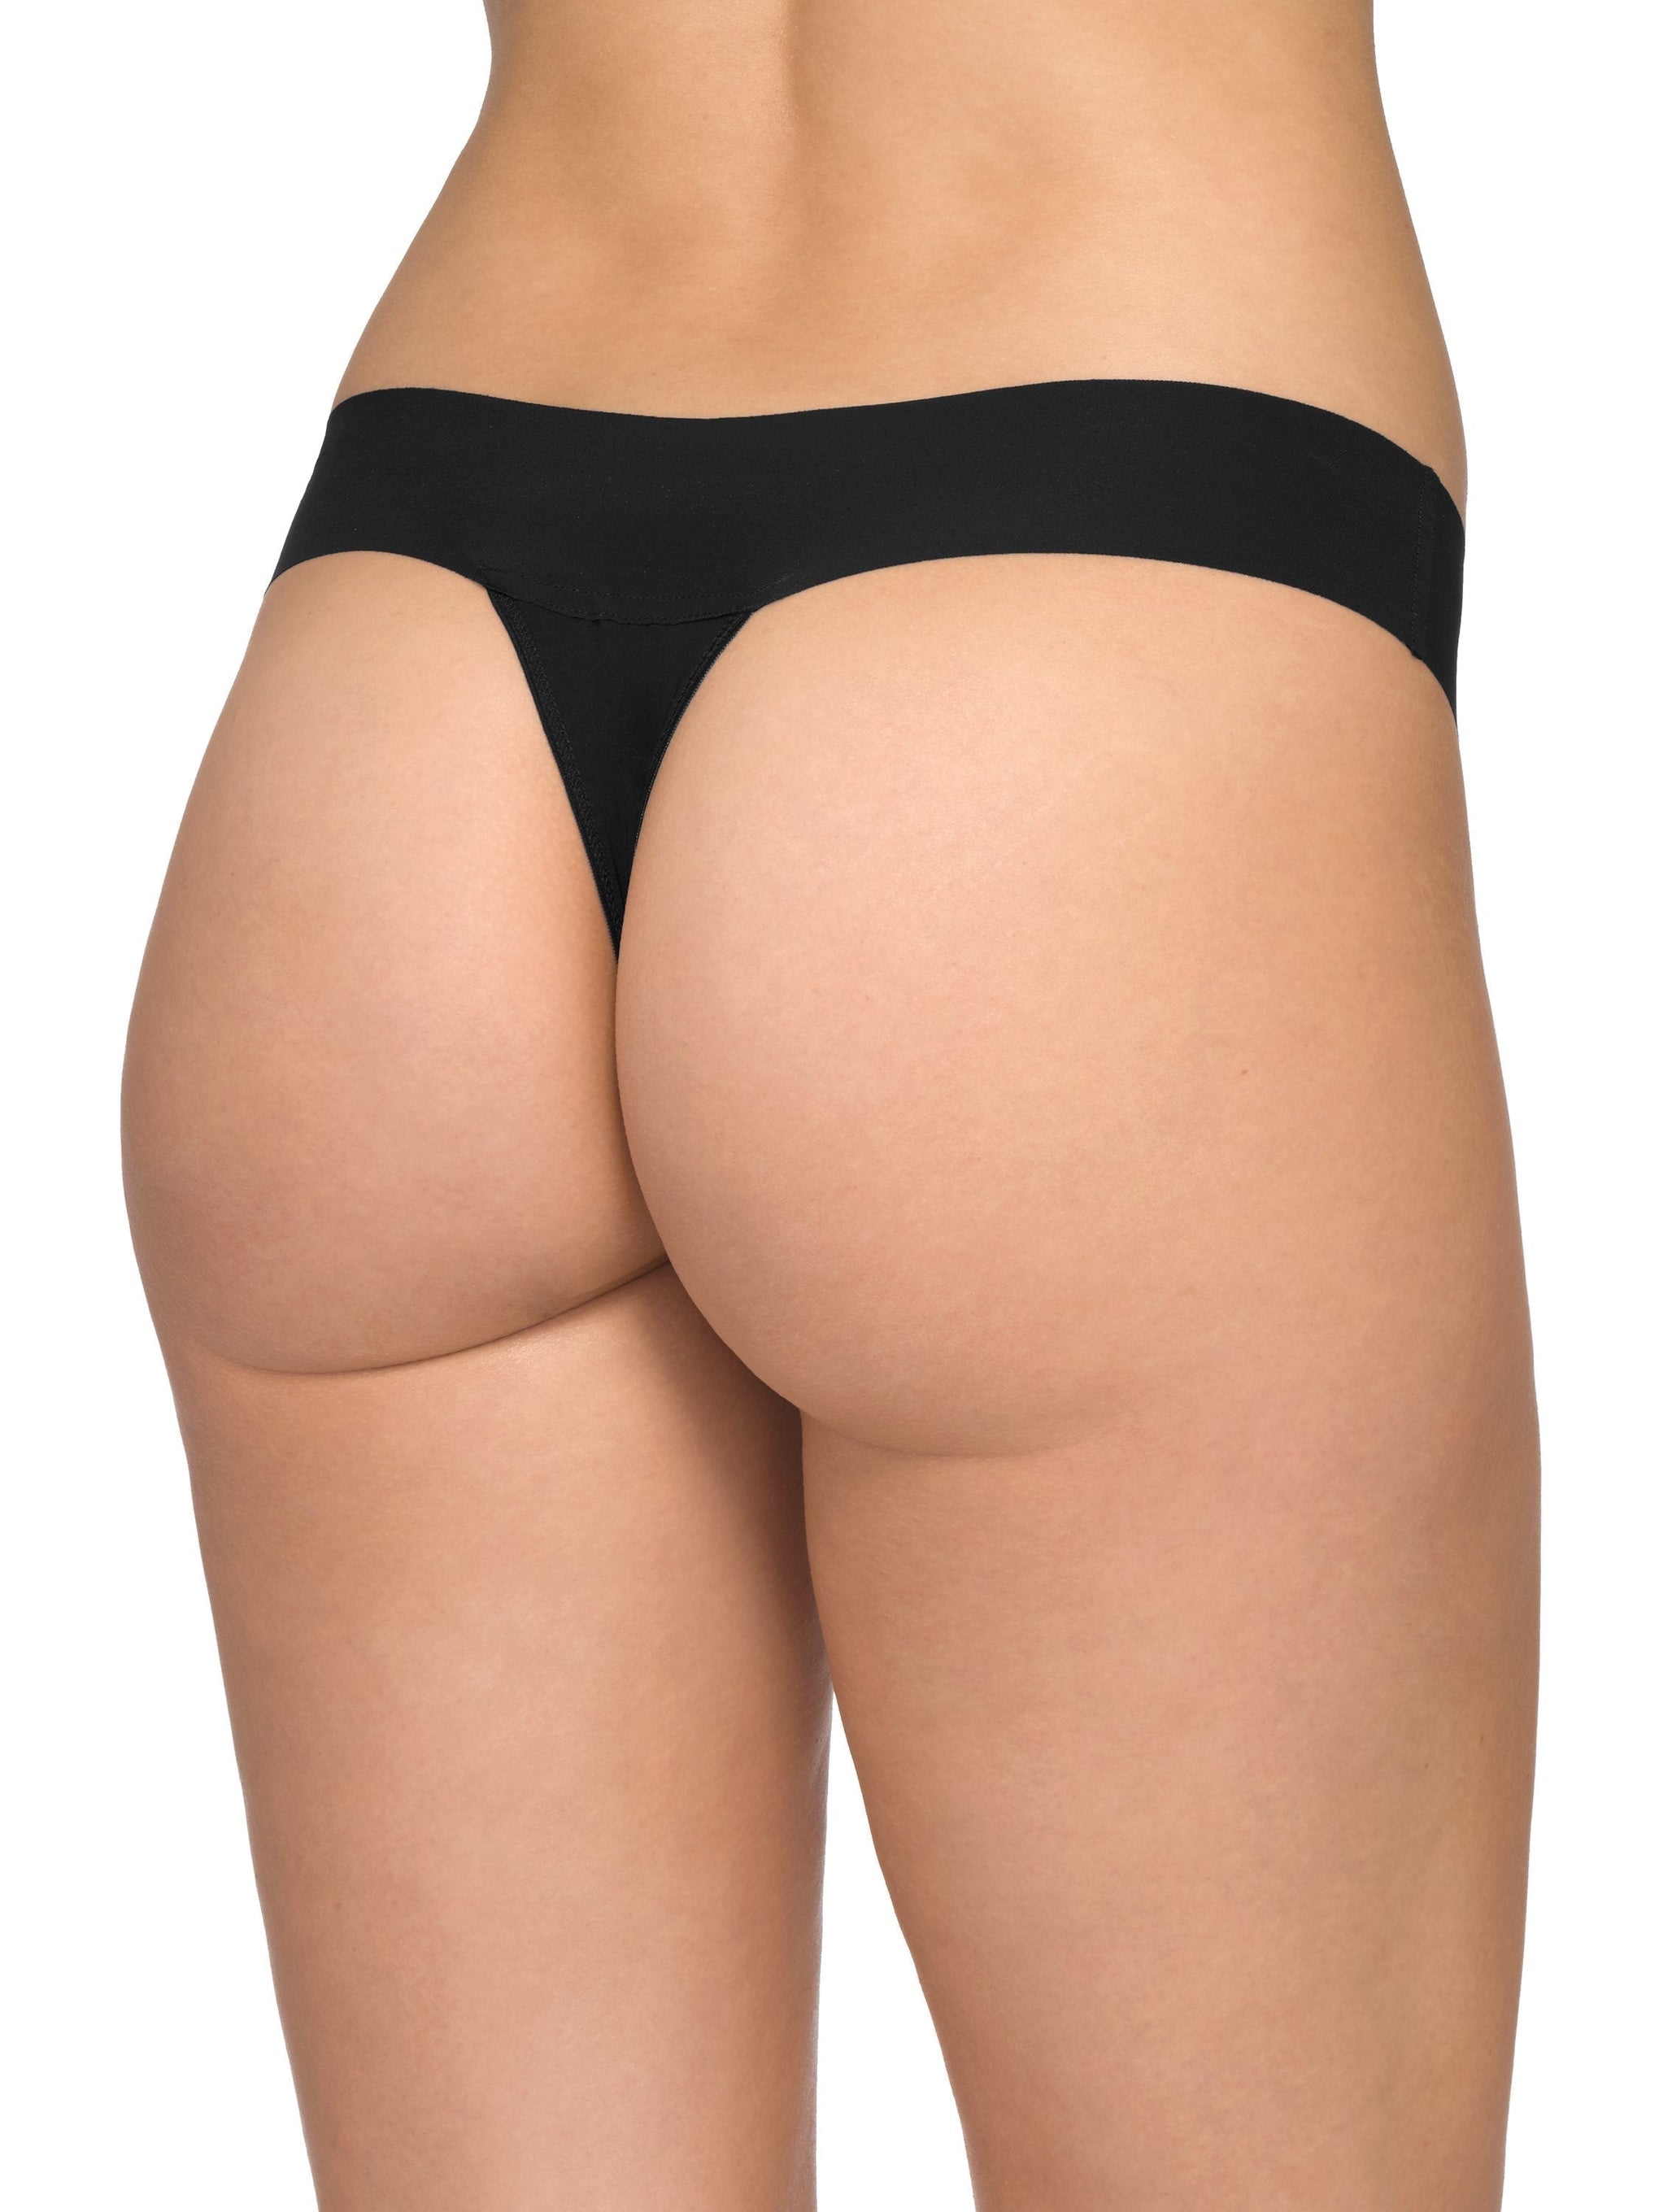 The Natural Women's Padded Panty Underwear, Black, S 